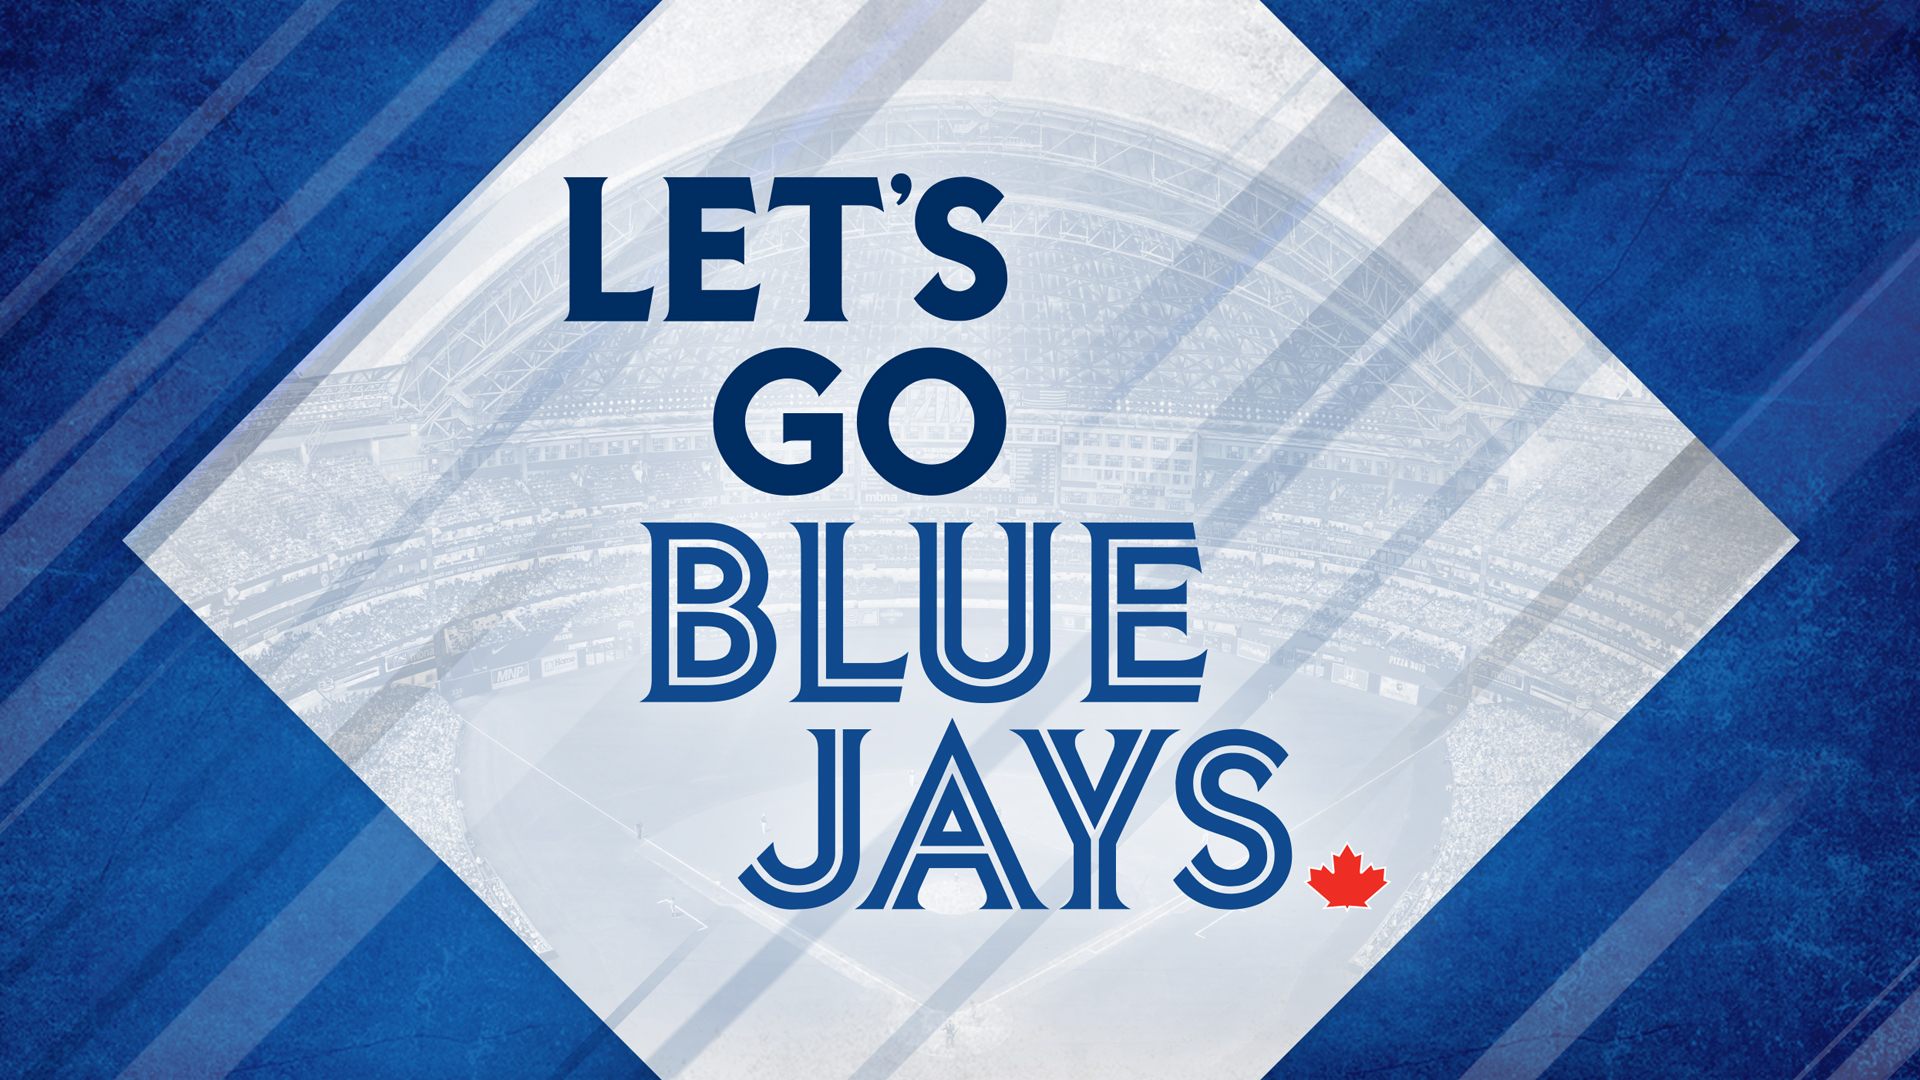 Wallpaper And Covers Toronto Blue Jays